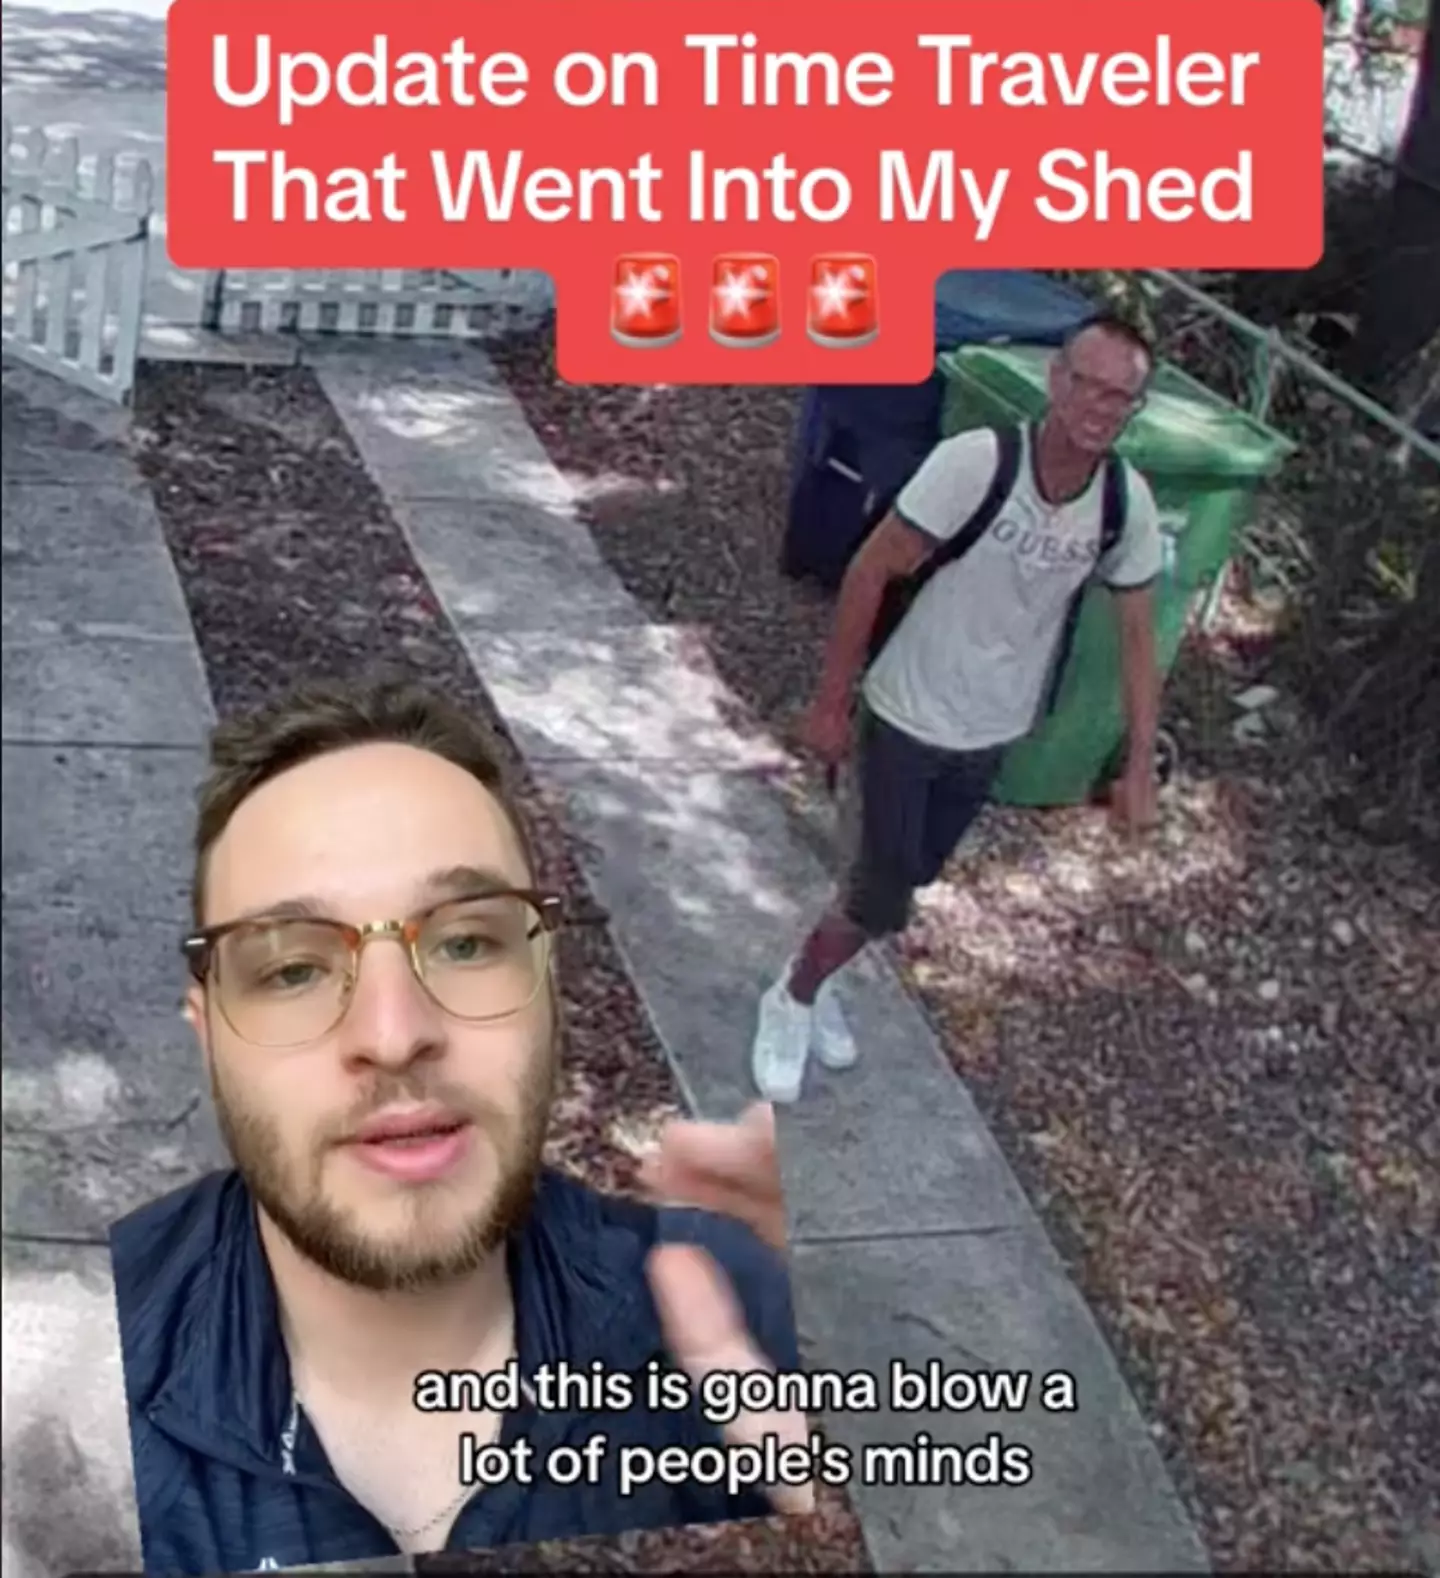 The TikToker's cameras picked up a man going into his backyard shed (TikTok/ @alecschaal)